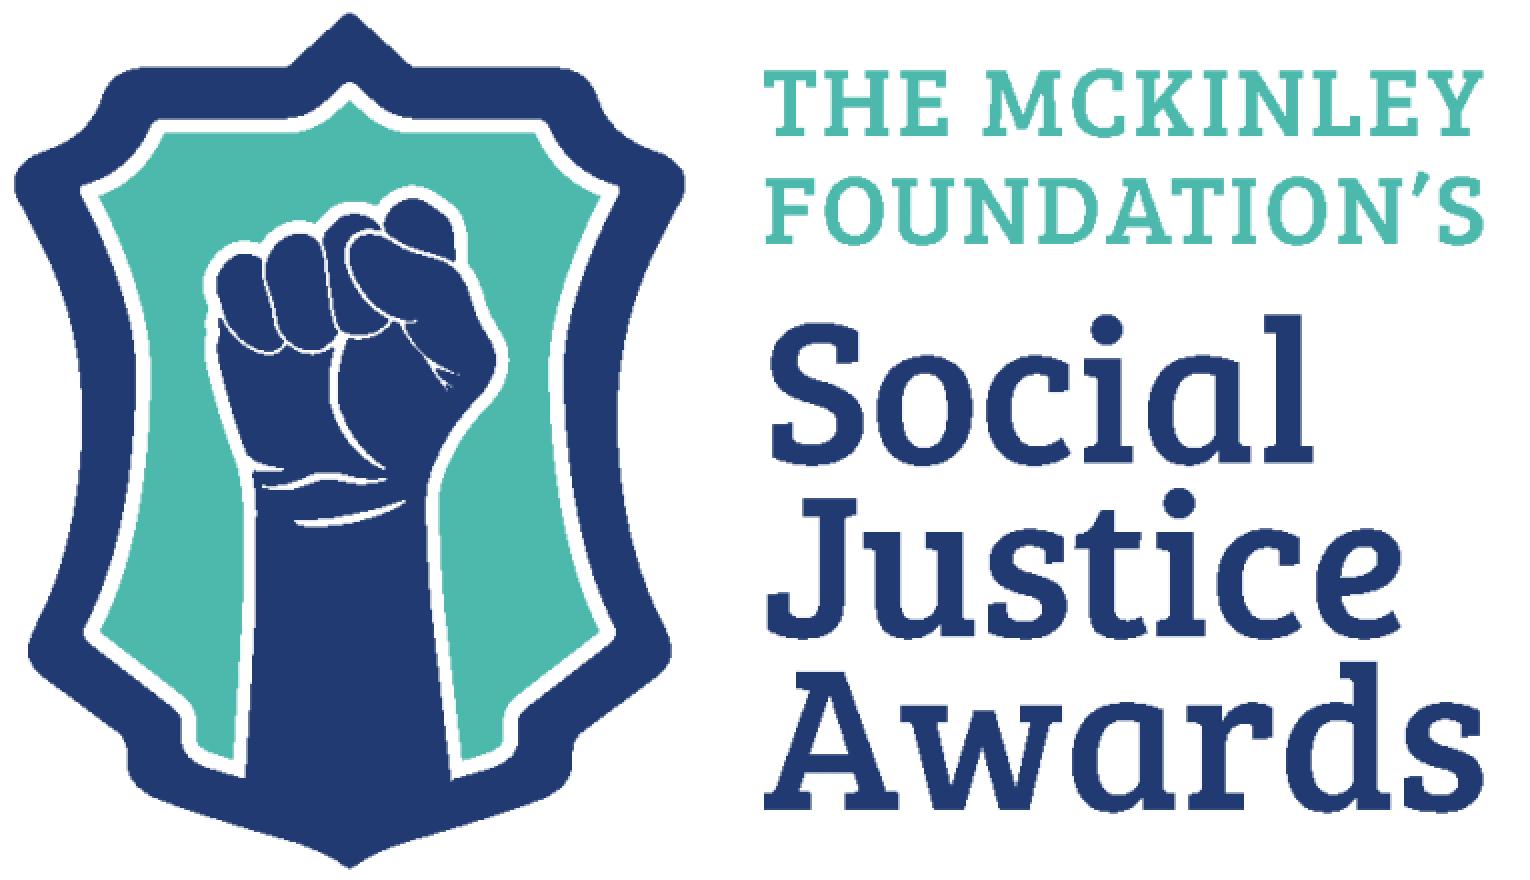 Nominations sought for McKinley Foundation’s Social Justice Awards